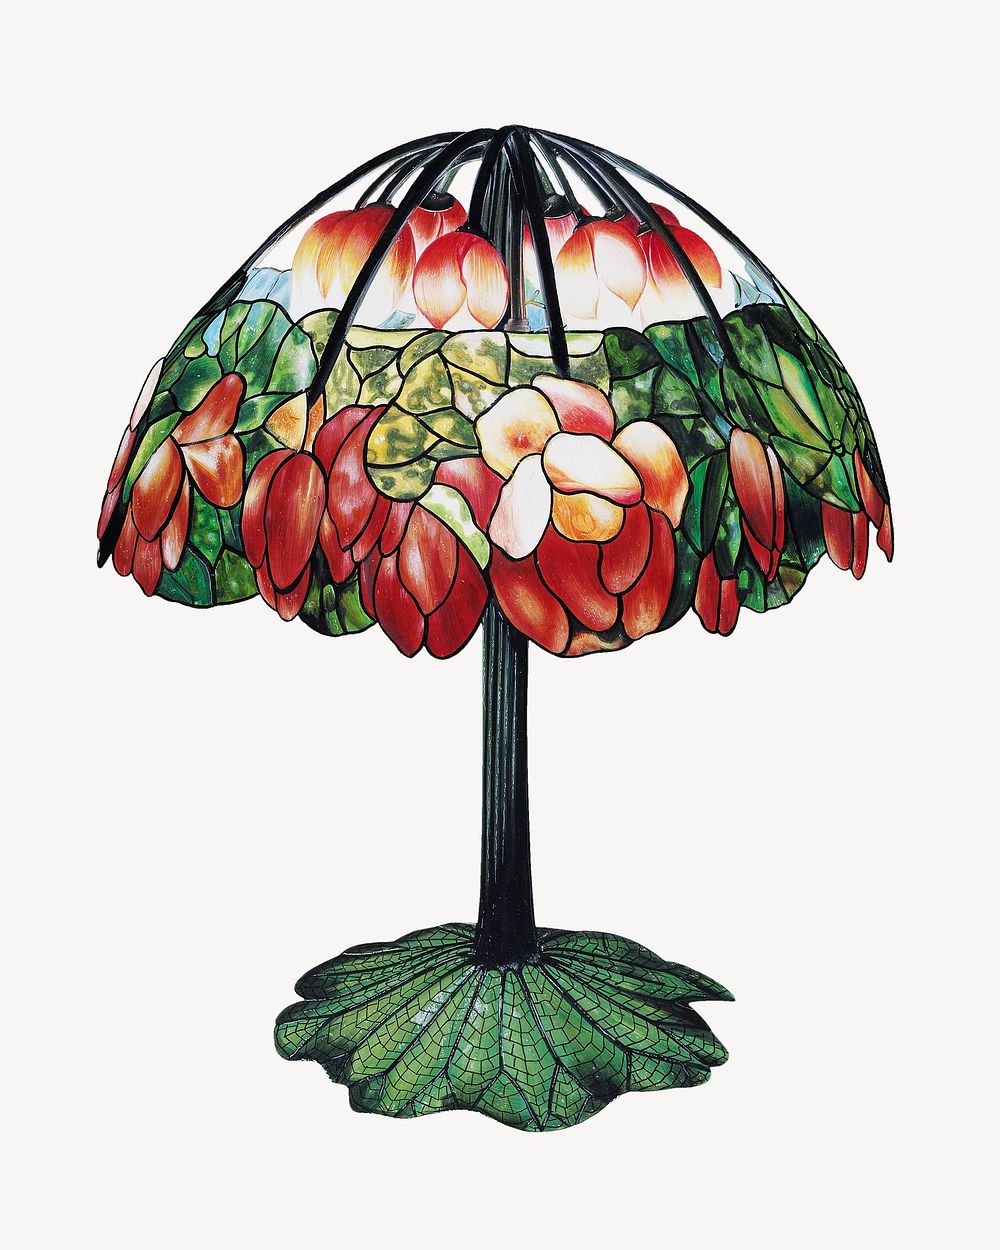 Design for a Lamp psd.  Remastered by rawpixel